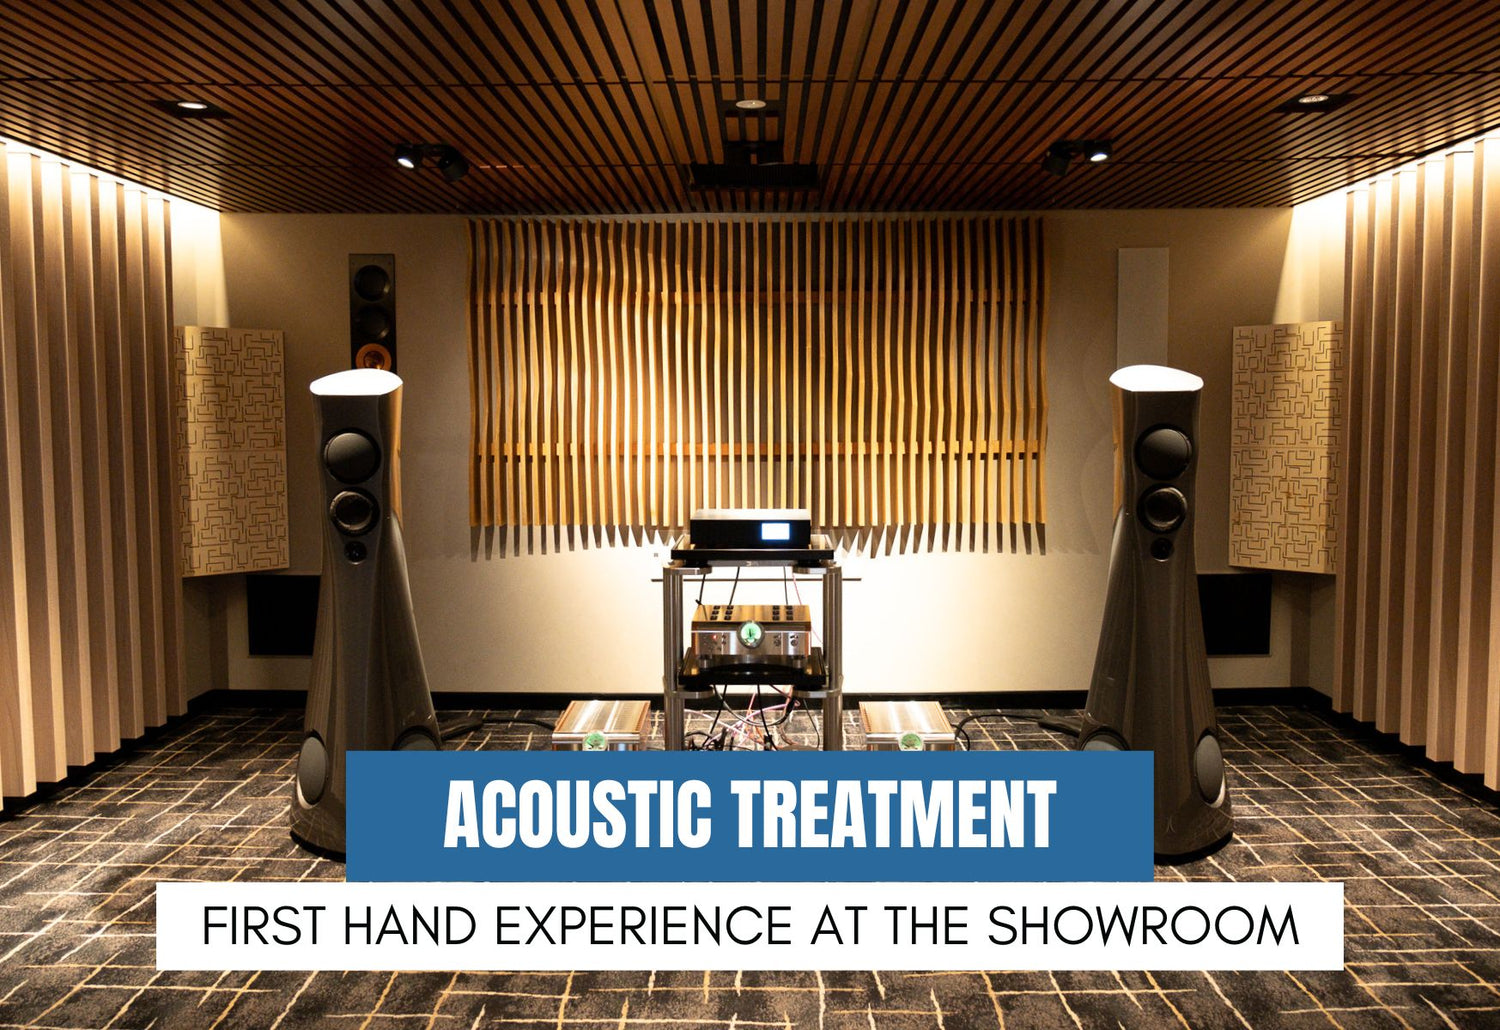 Acoustic Treatment - Our First Hand Experience in the Showroom